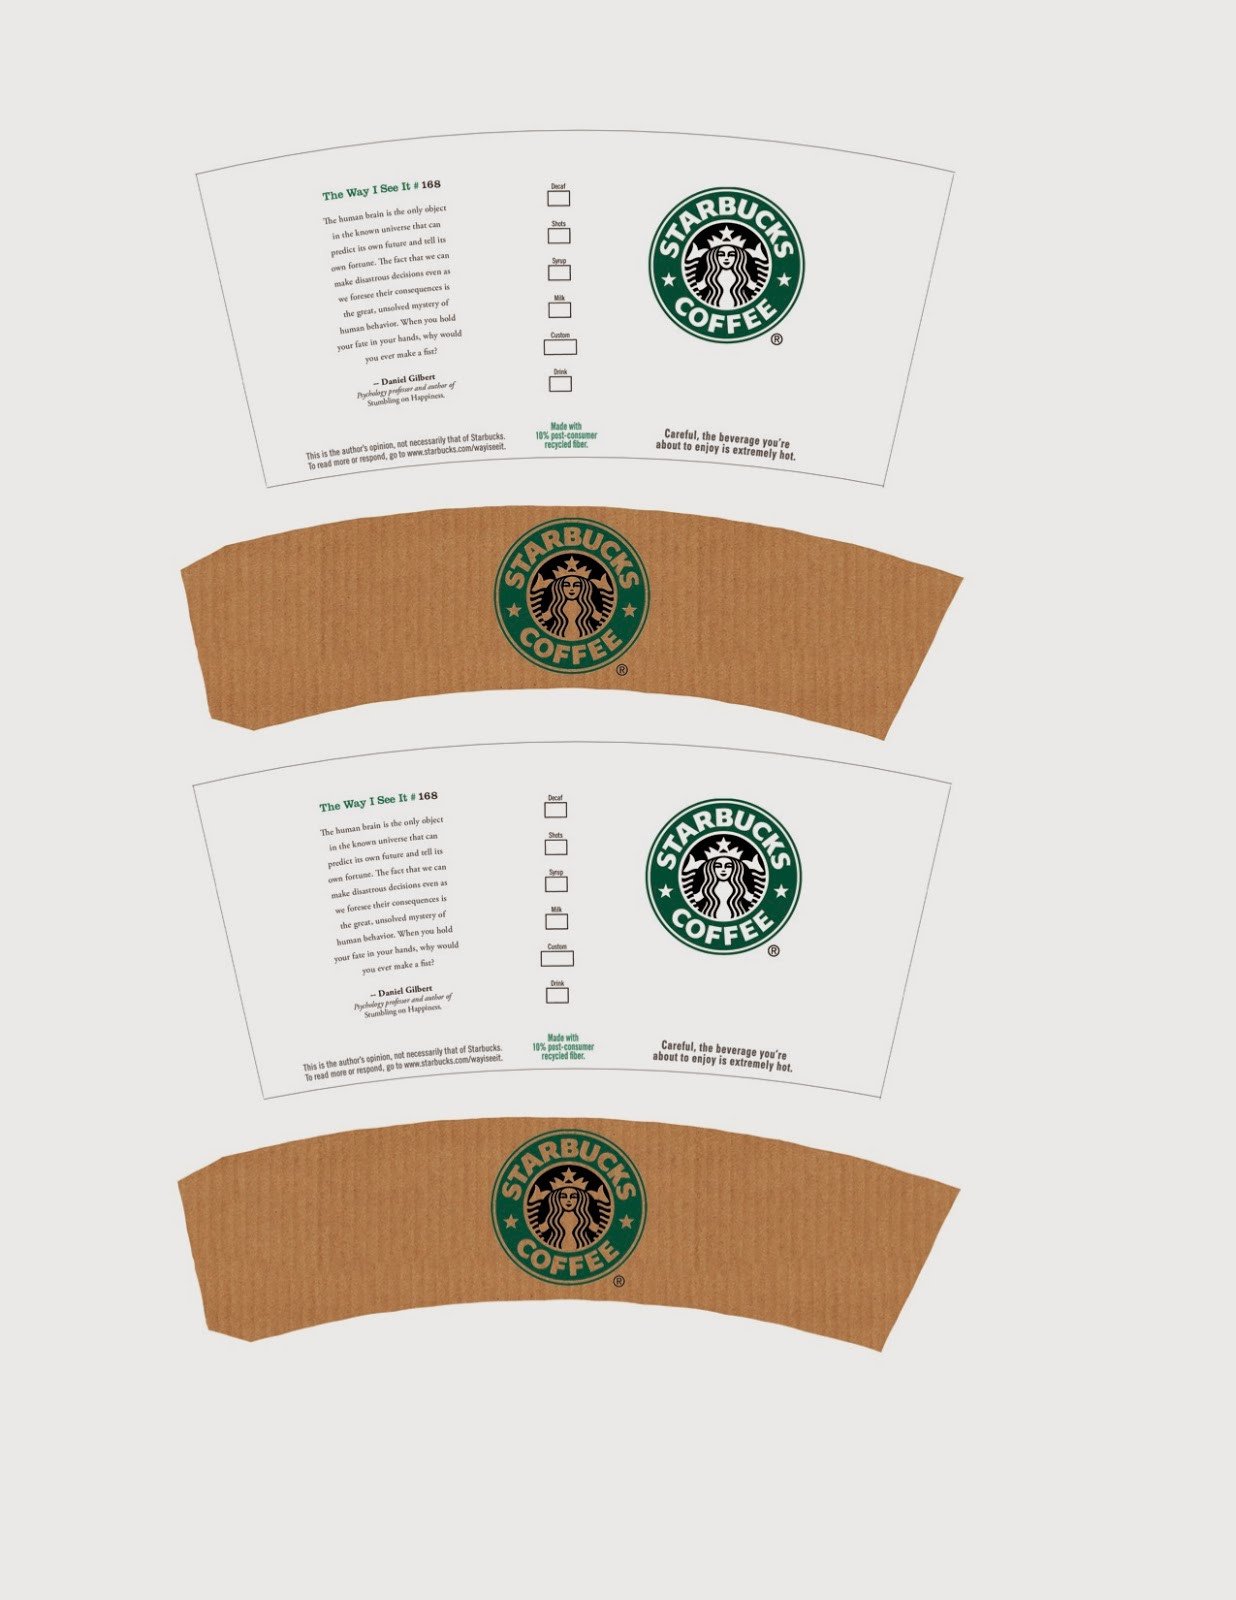 Starbucks Sleeve Template Search Results for “printable Coffee Sleeve Template